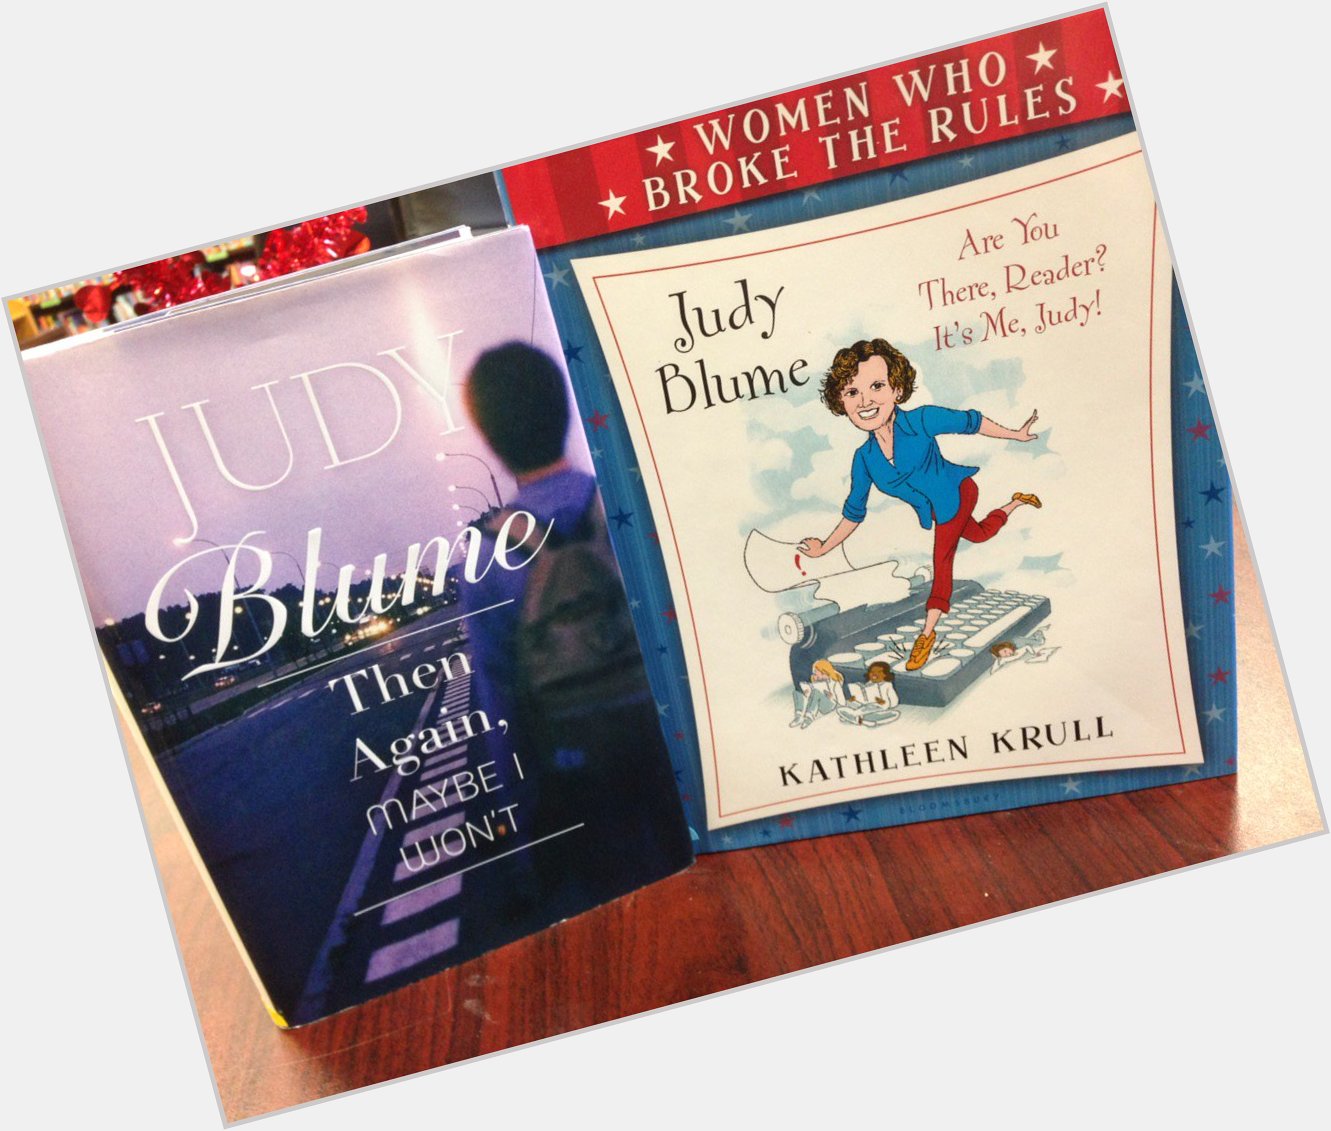 Happy Birthday Judy Blume! Stop in to the Center & browse through her books in our collection! 